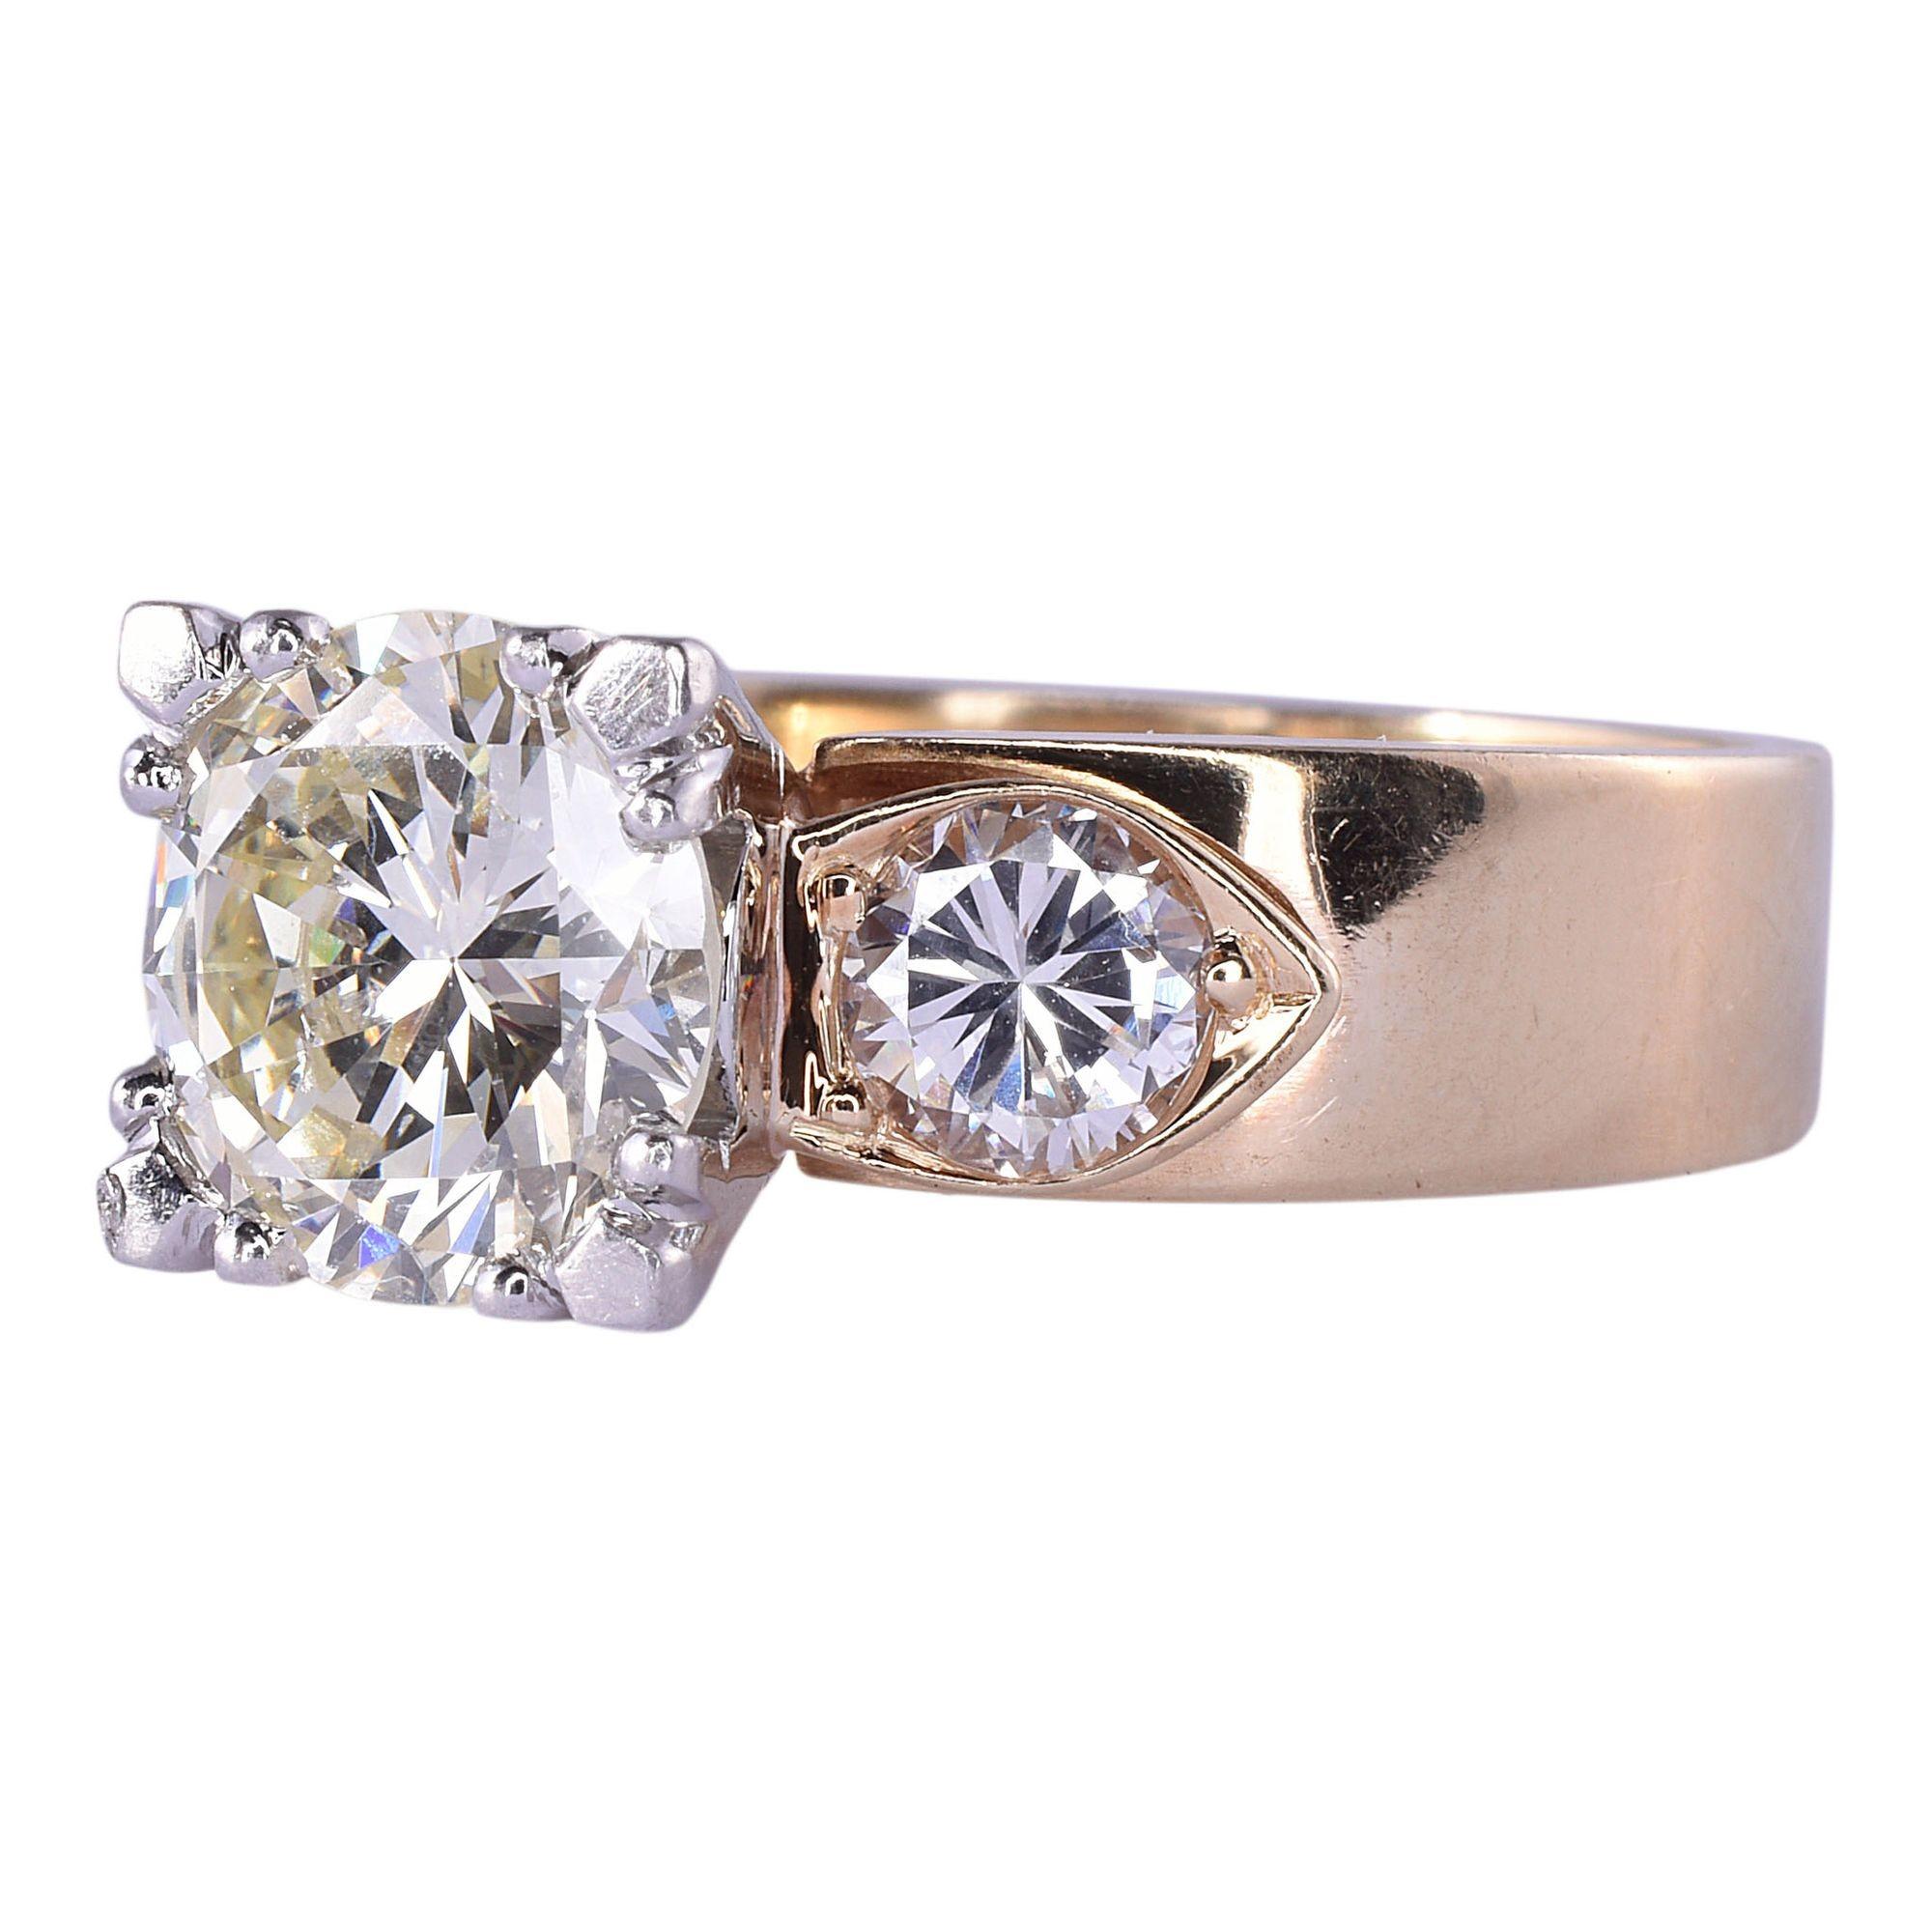 Estate 1.80 carat center diamond engagement ring. This 14 karat yellow gold wide band engagement ring features a 1.80 carat round brilliant cut center diamond with SI1 clarity and L color. There are two round brilliant cut accent diamonds at .29